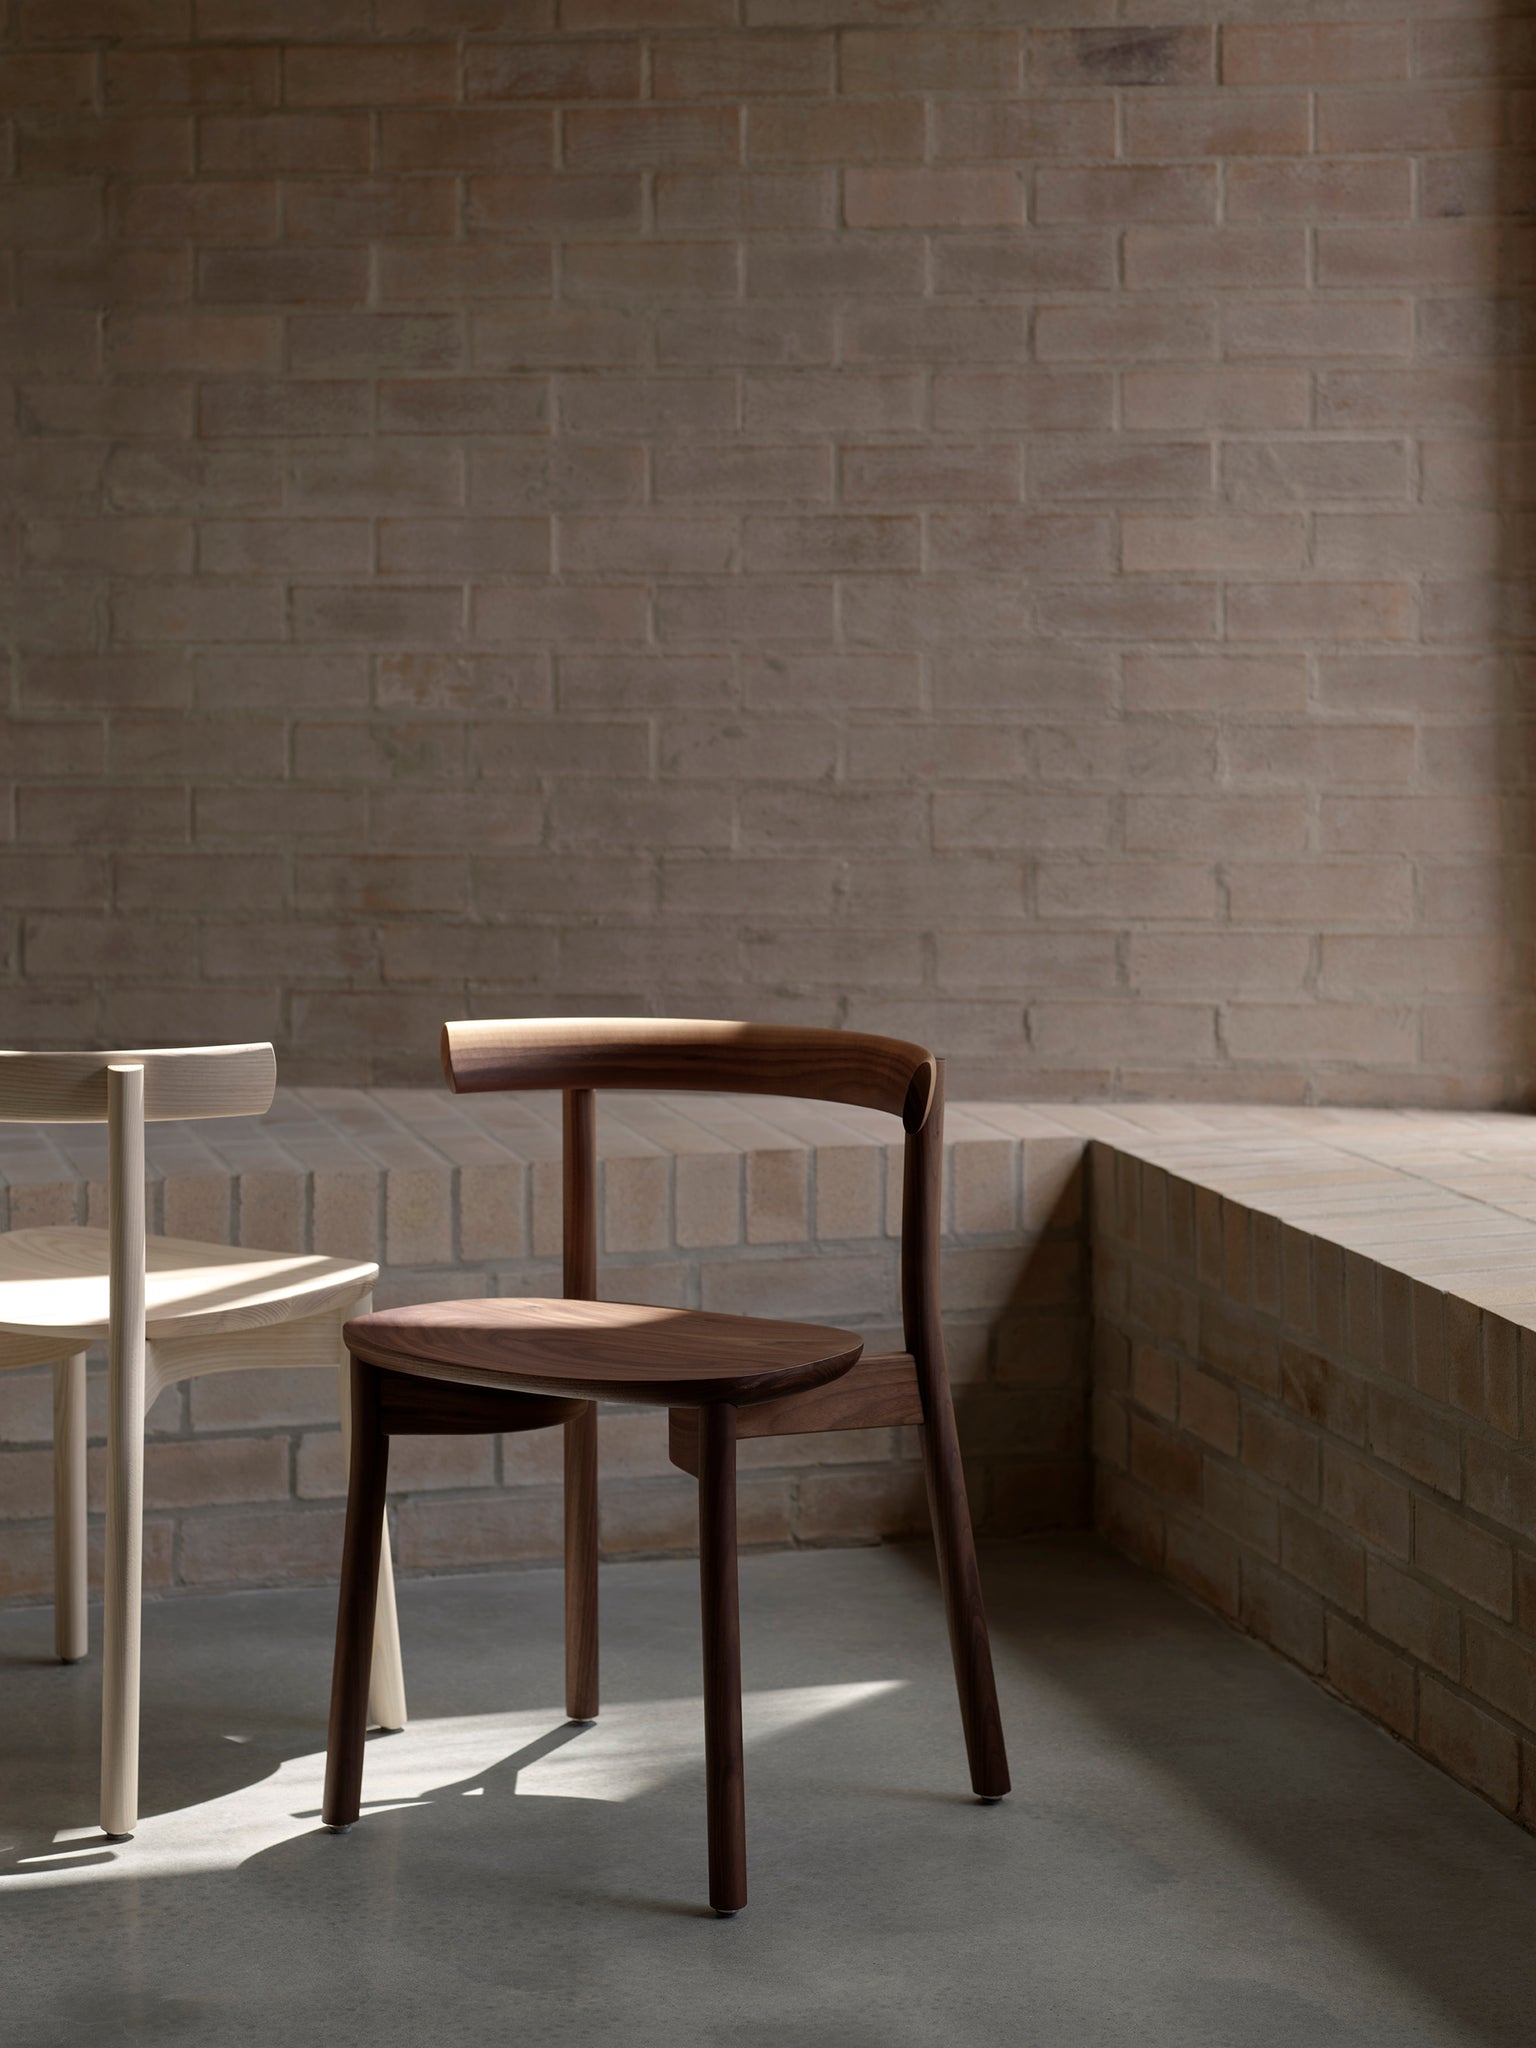 Torii chairs in walnut and white ash with brick background